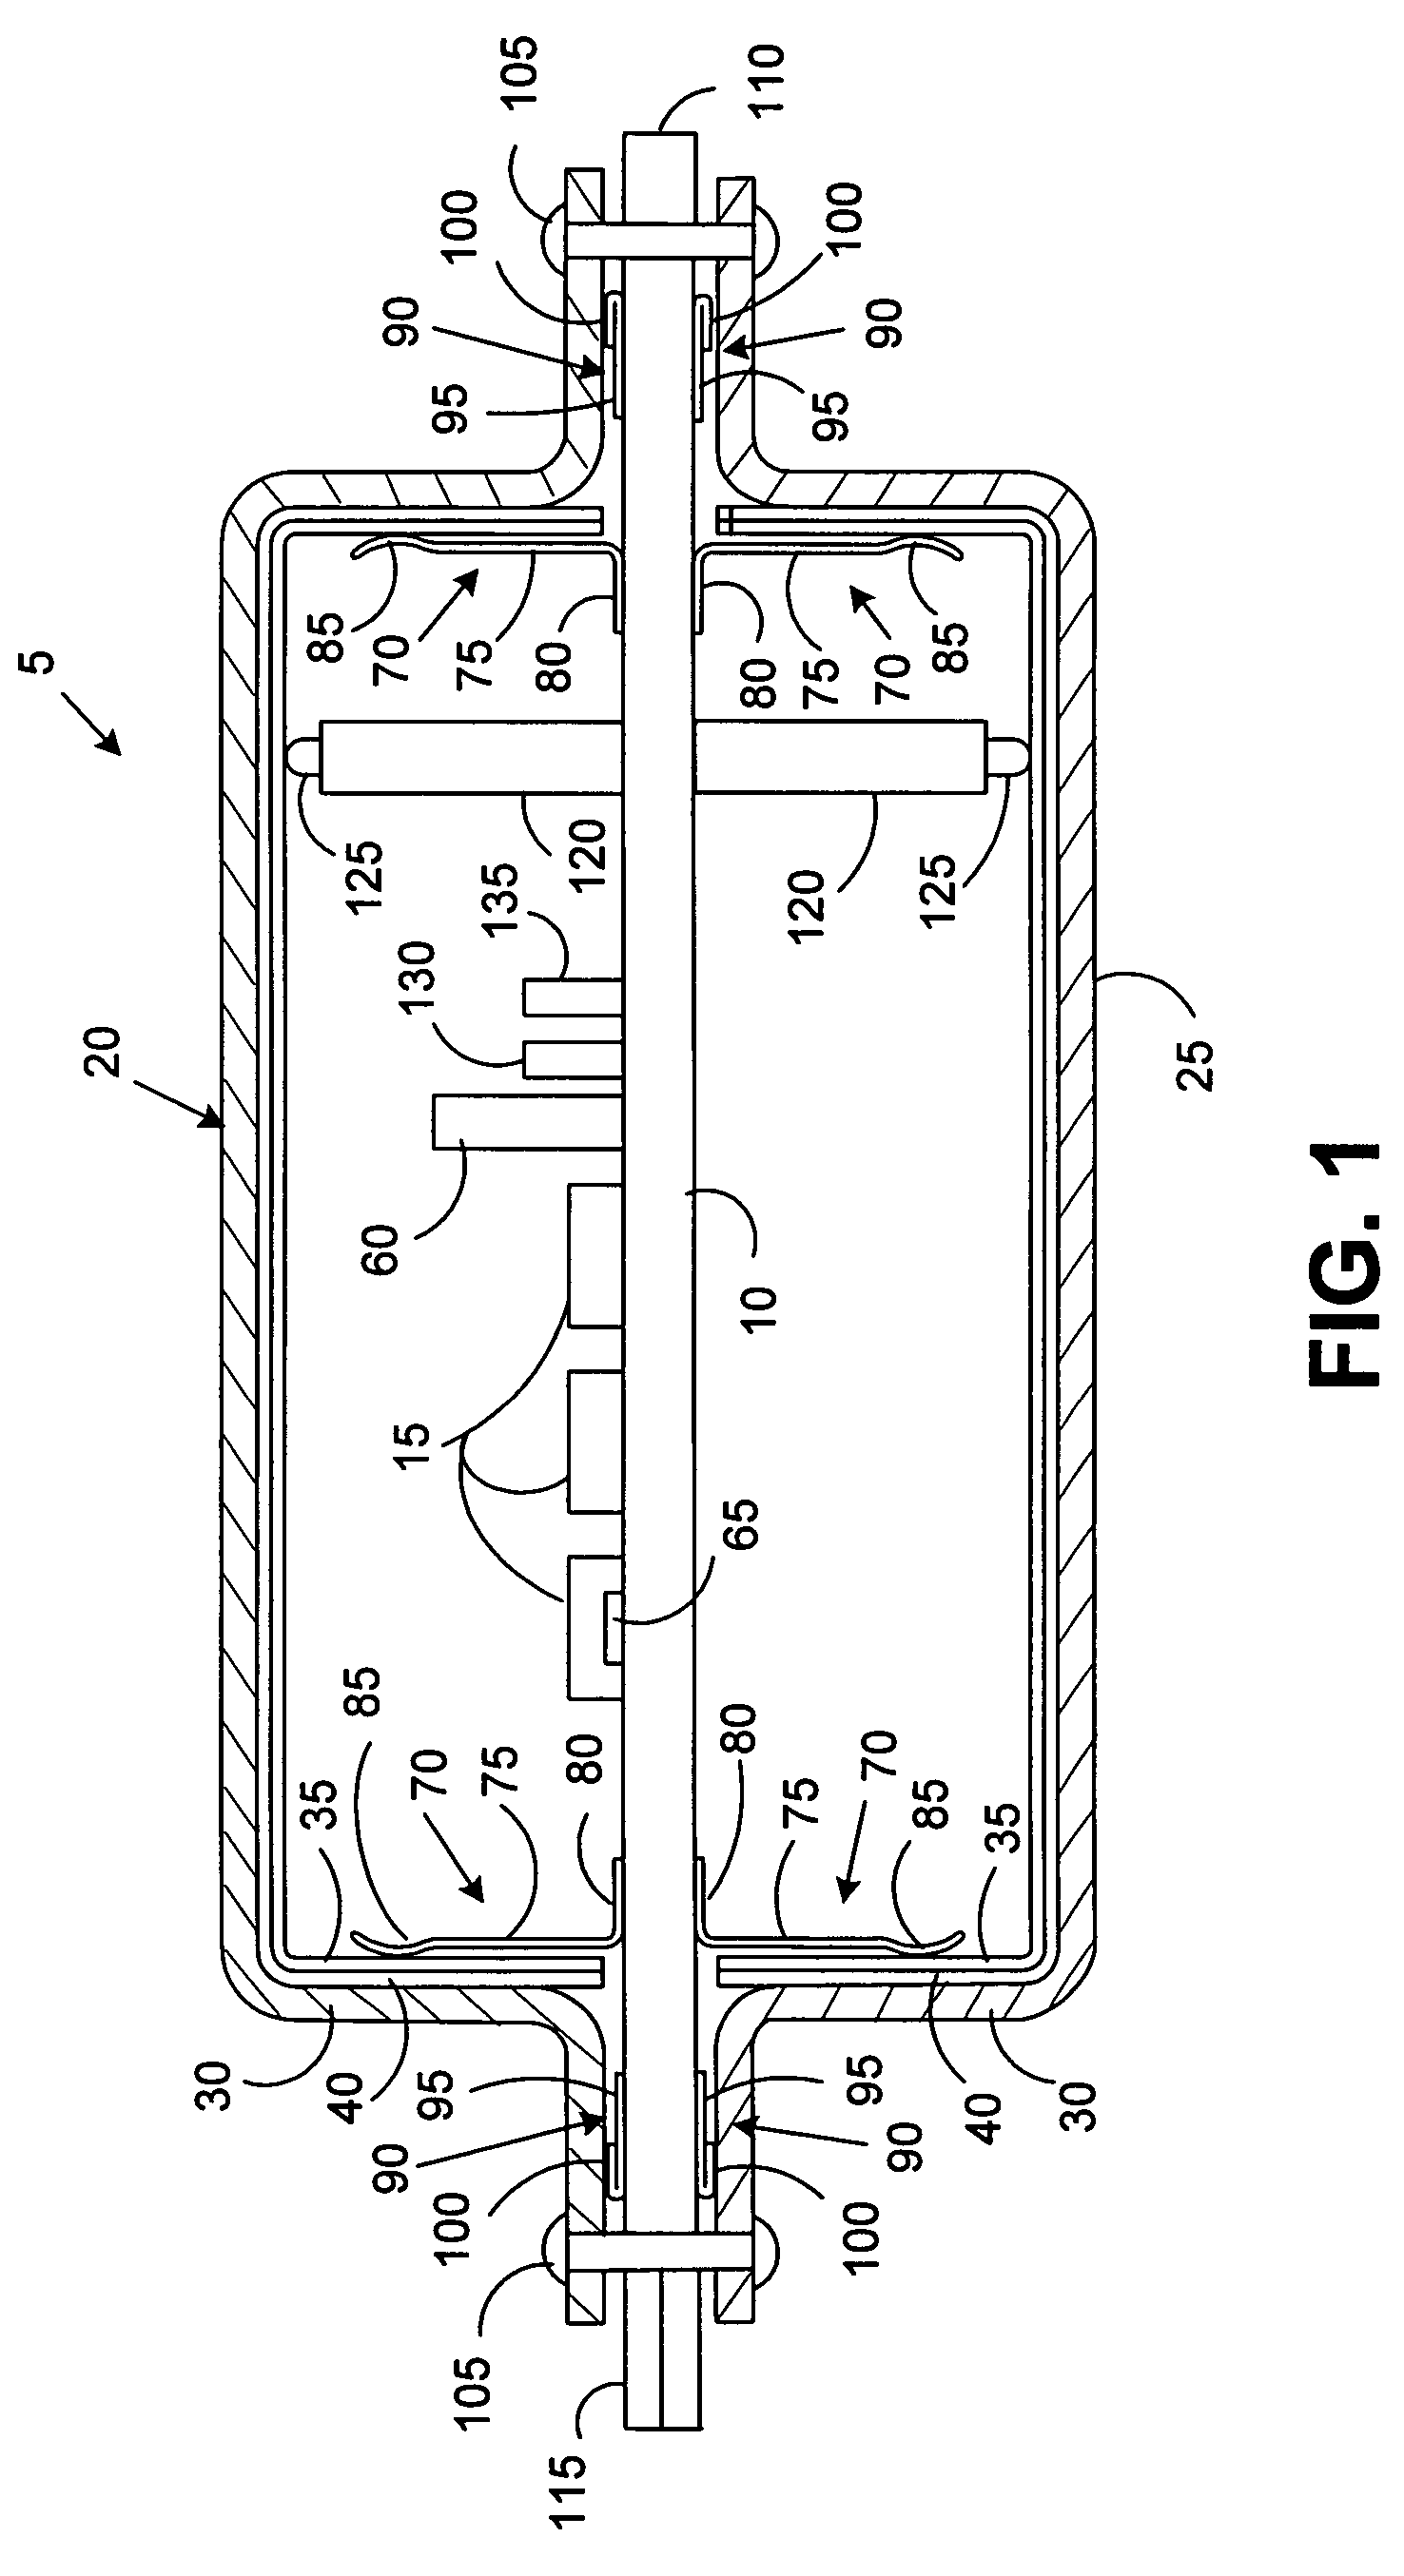 Security barrier for electronic circuitry